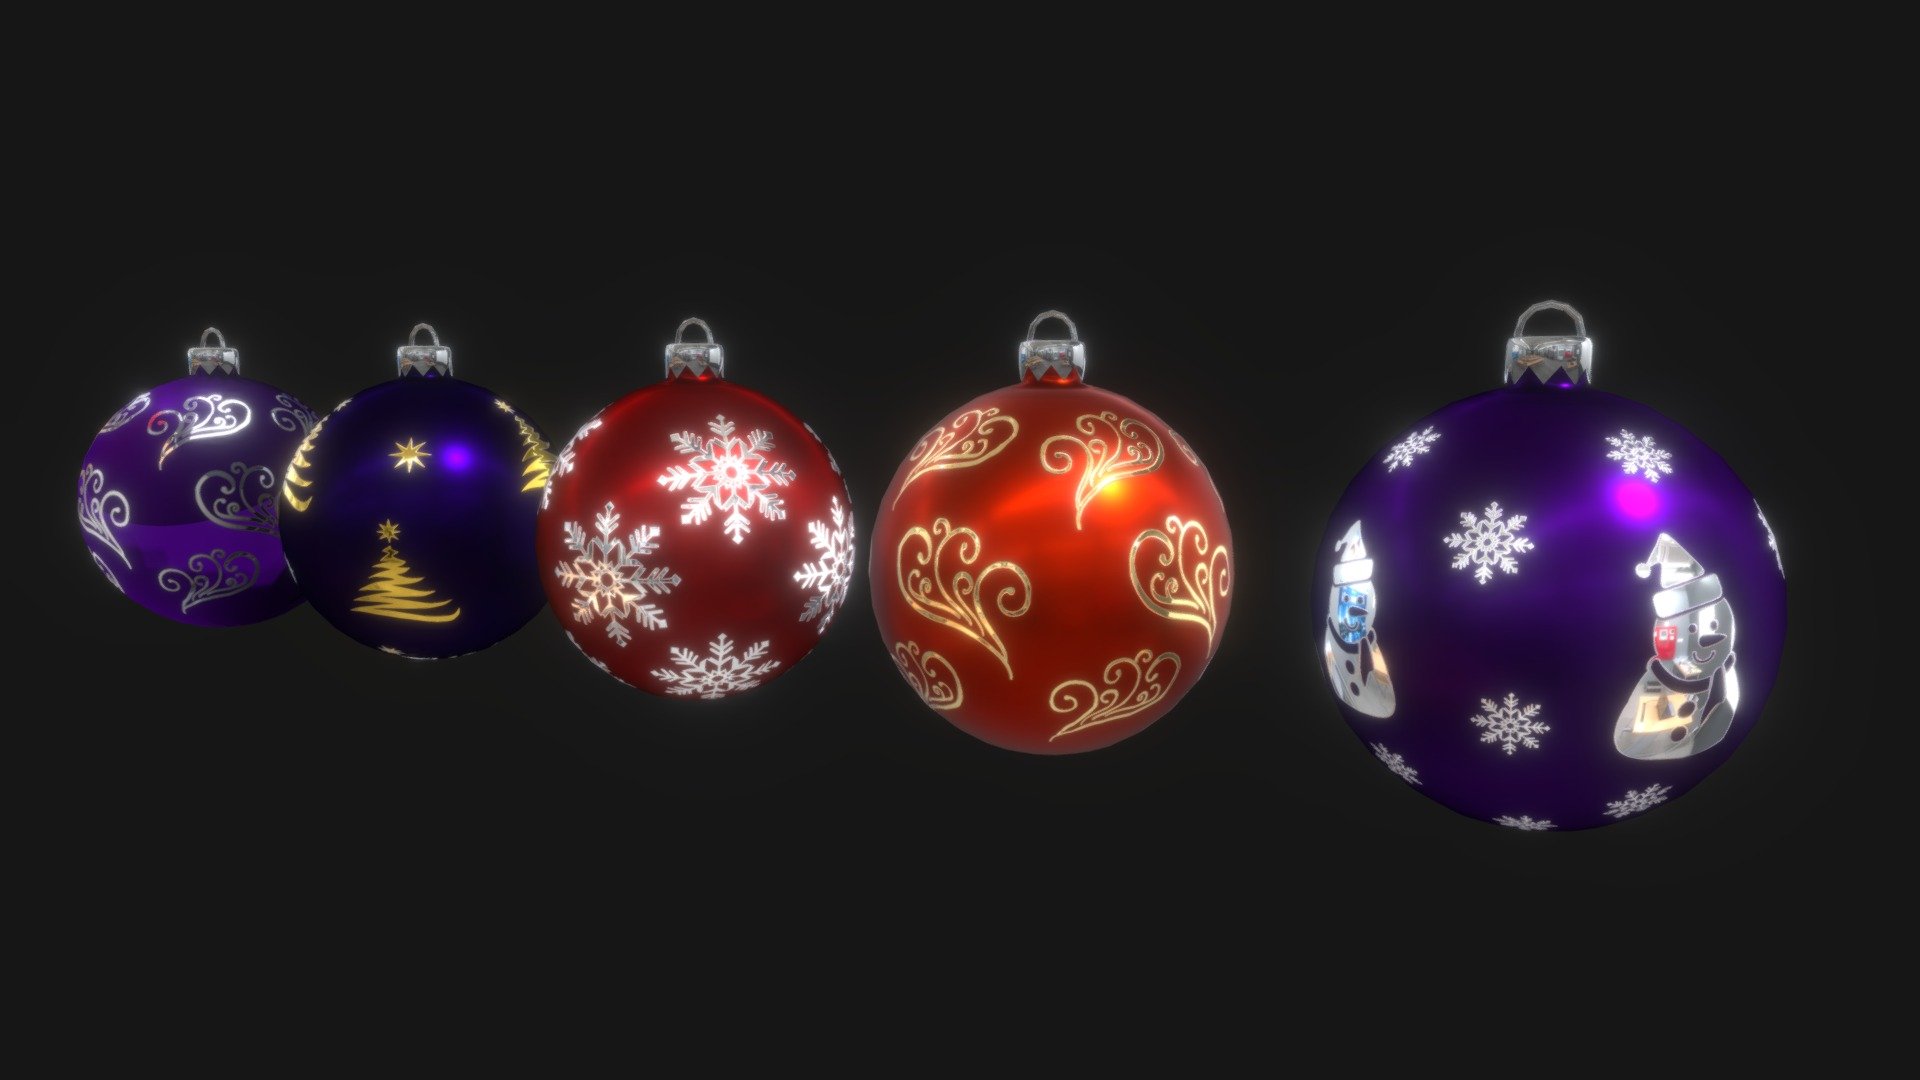 Various designs of Bauble
Christmas decoration for Christmas tree 3d model